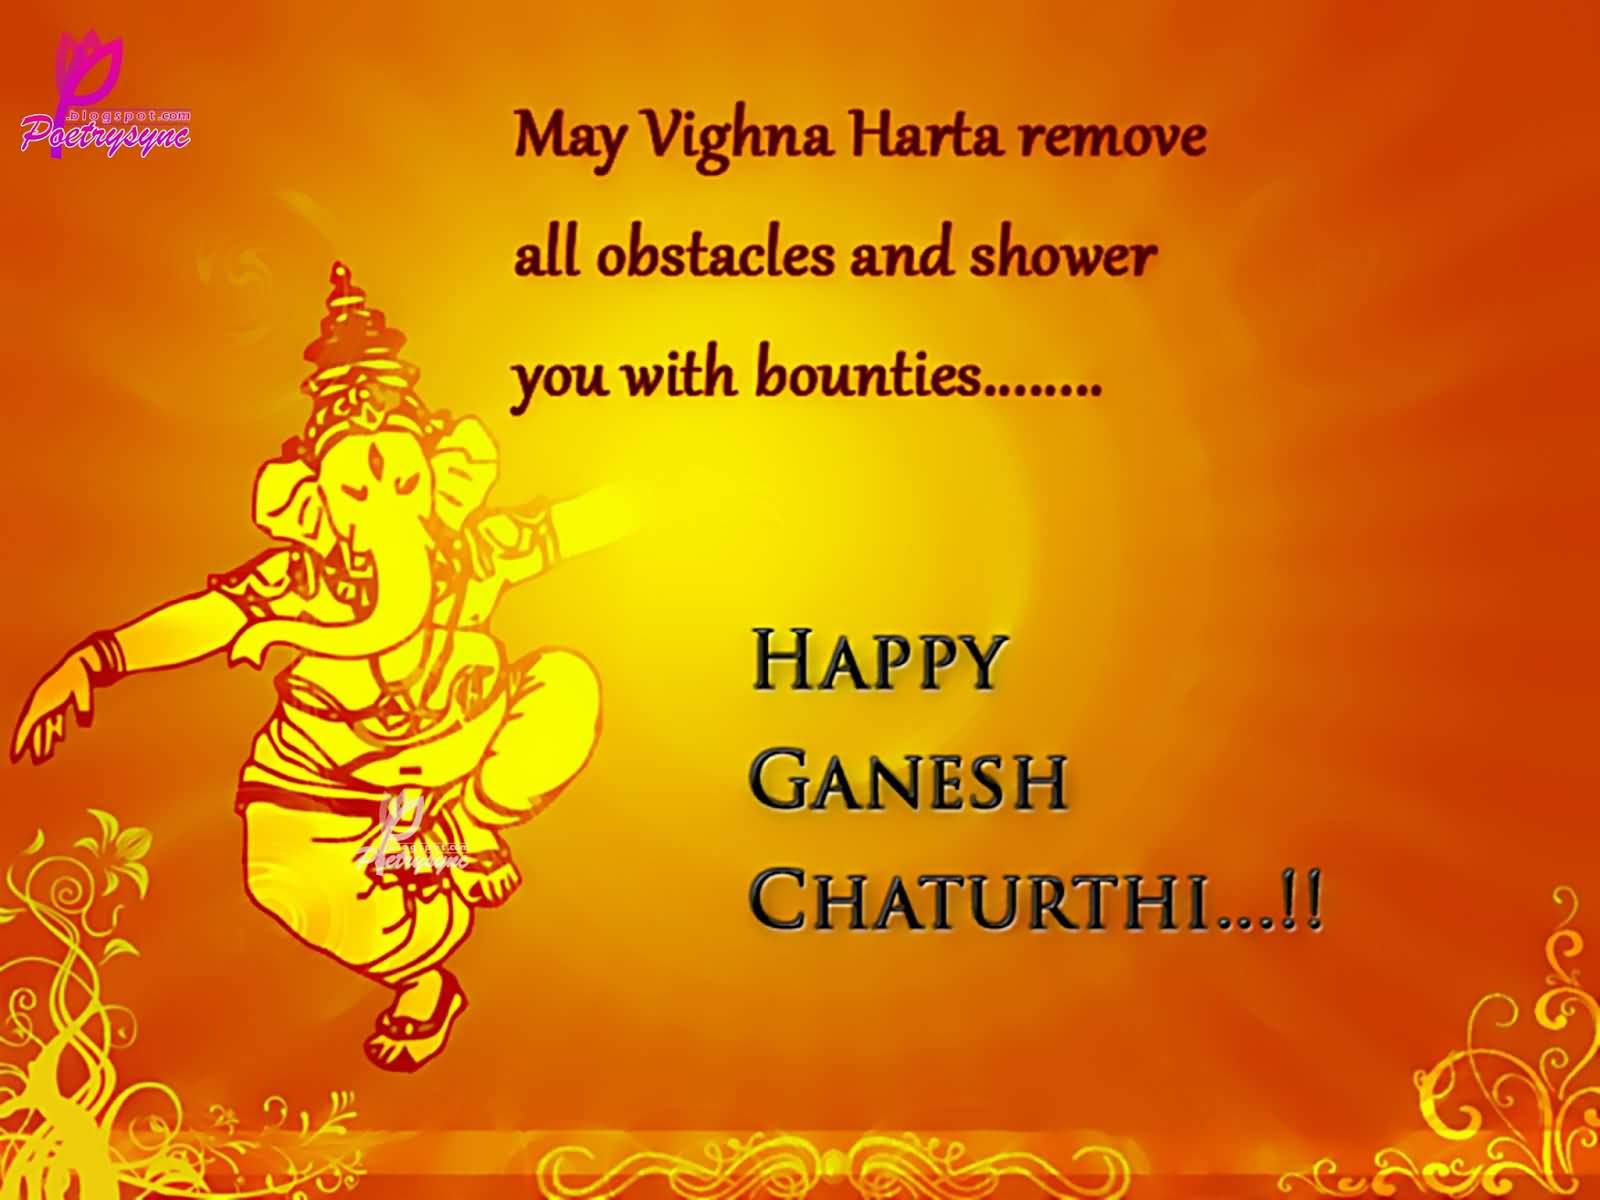 May Vighna Harta Remove All Obstacles And Shower You With Bounties Happy Ganesh Chaturthi Greeting Card